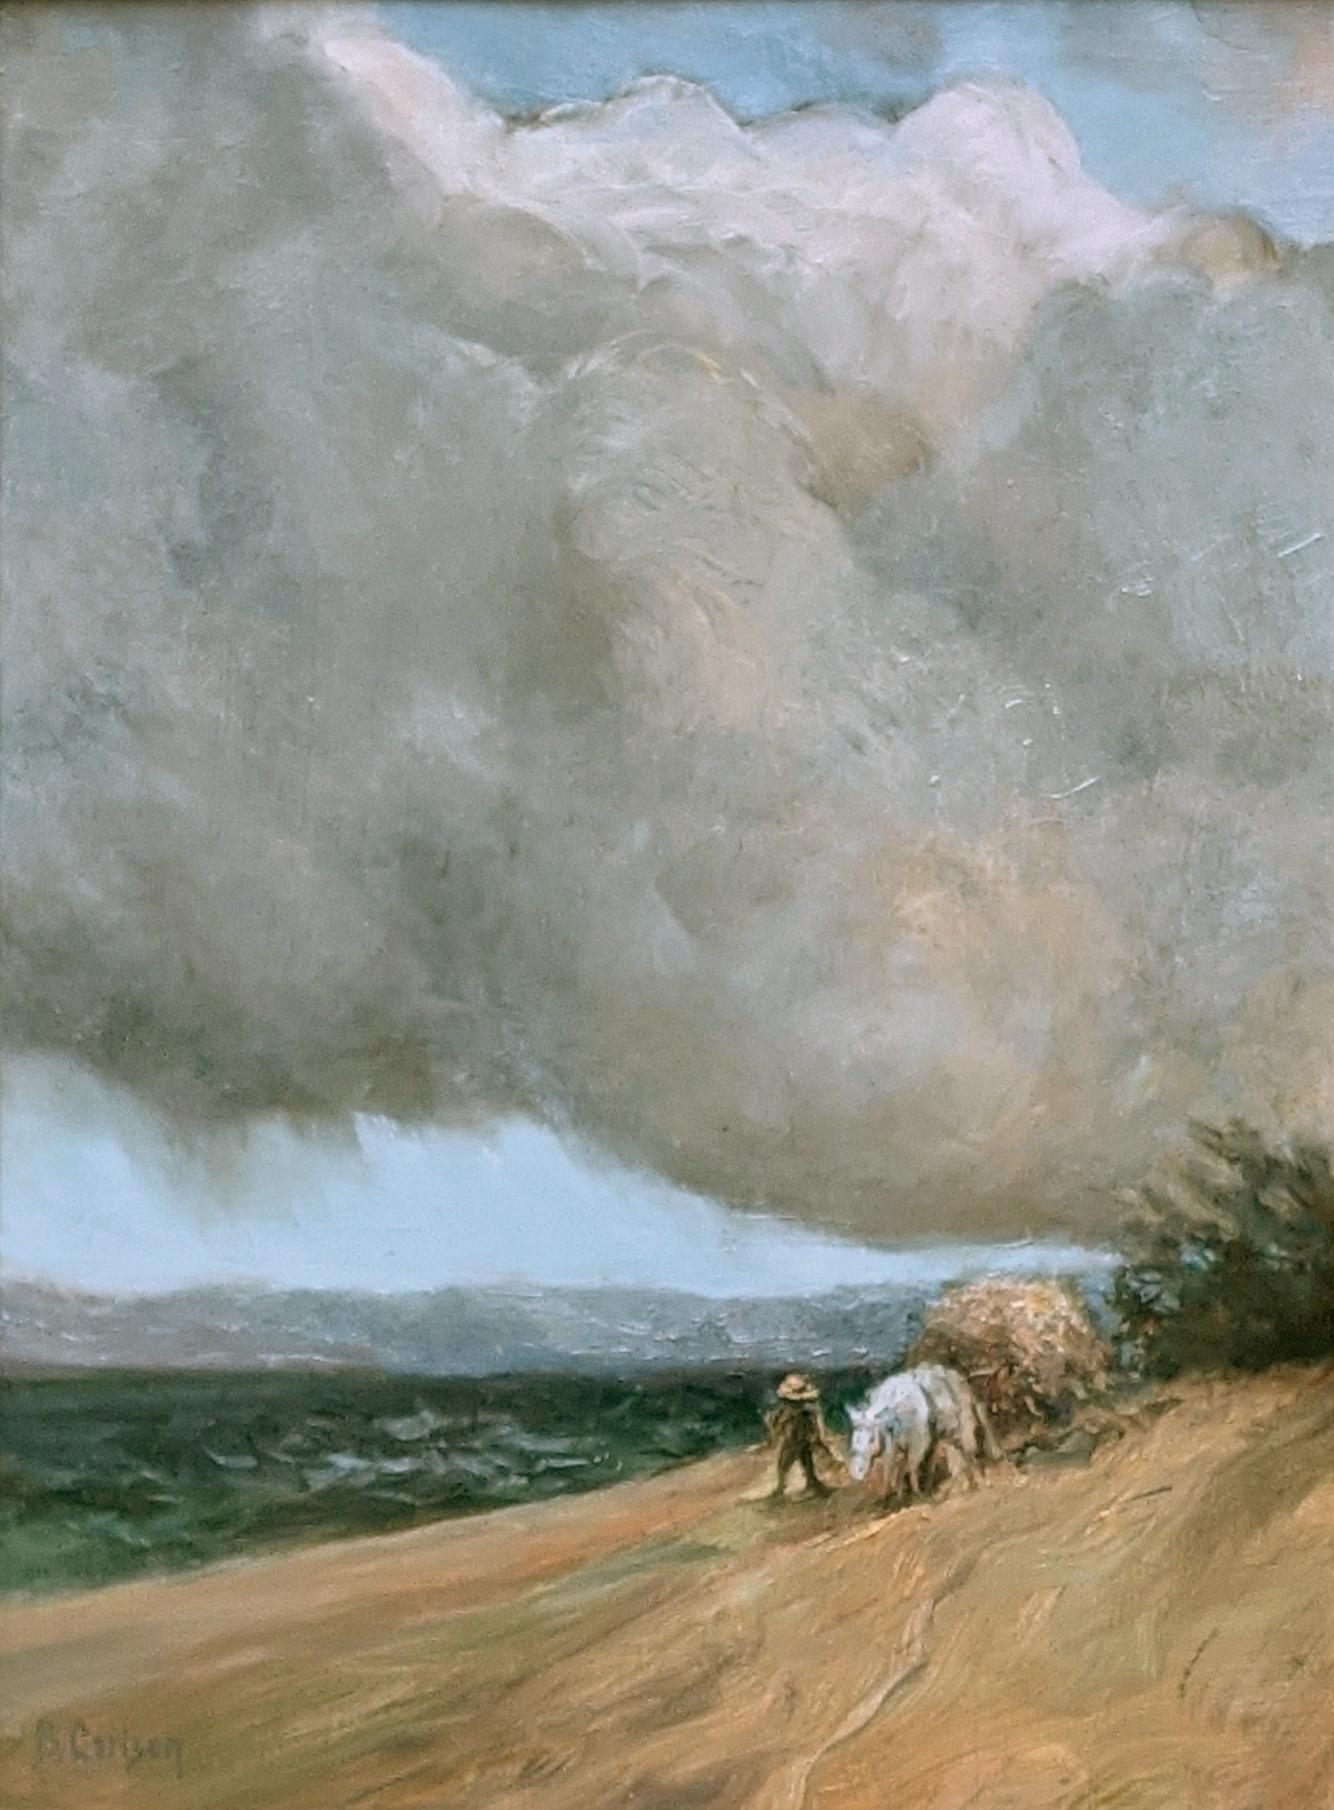  Dramatic Landscape with Foreboding Clouds Threaten A Weary 19th C. Farmer - Realist Painting by Beth Carlson